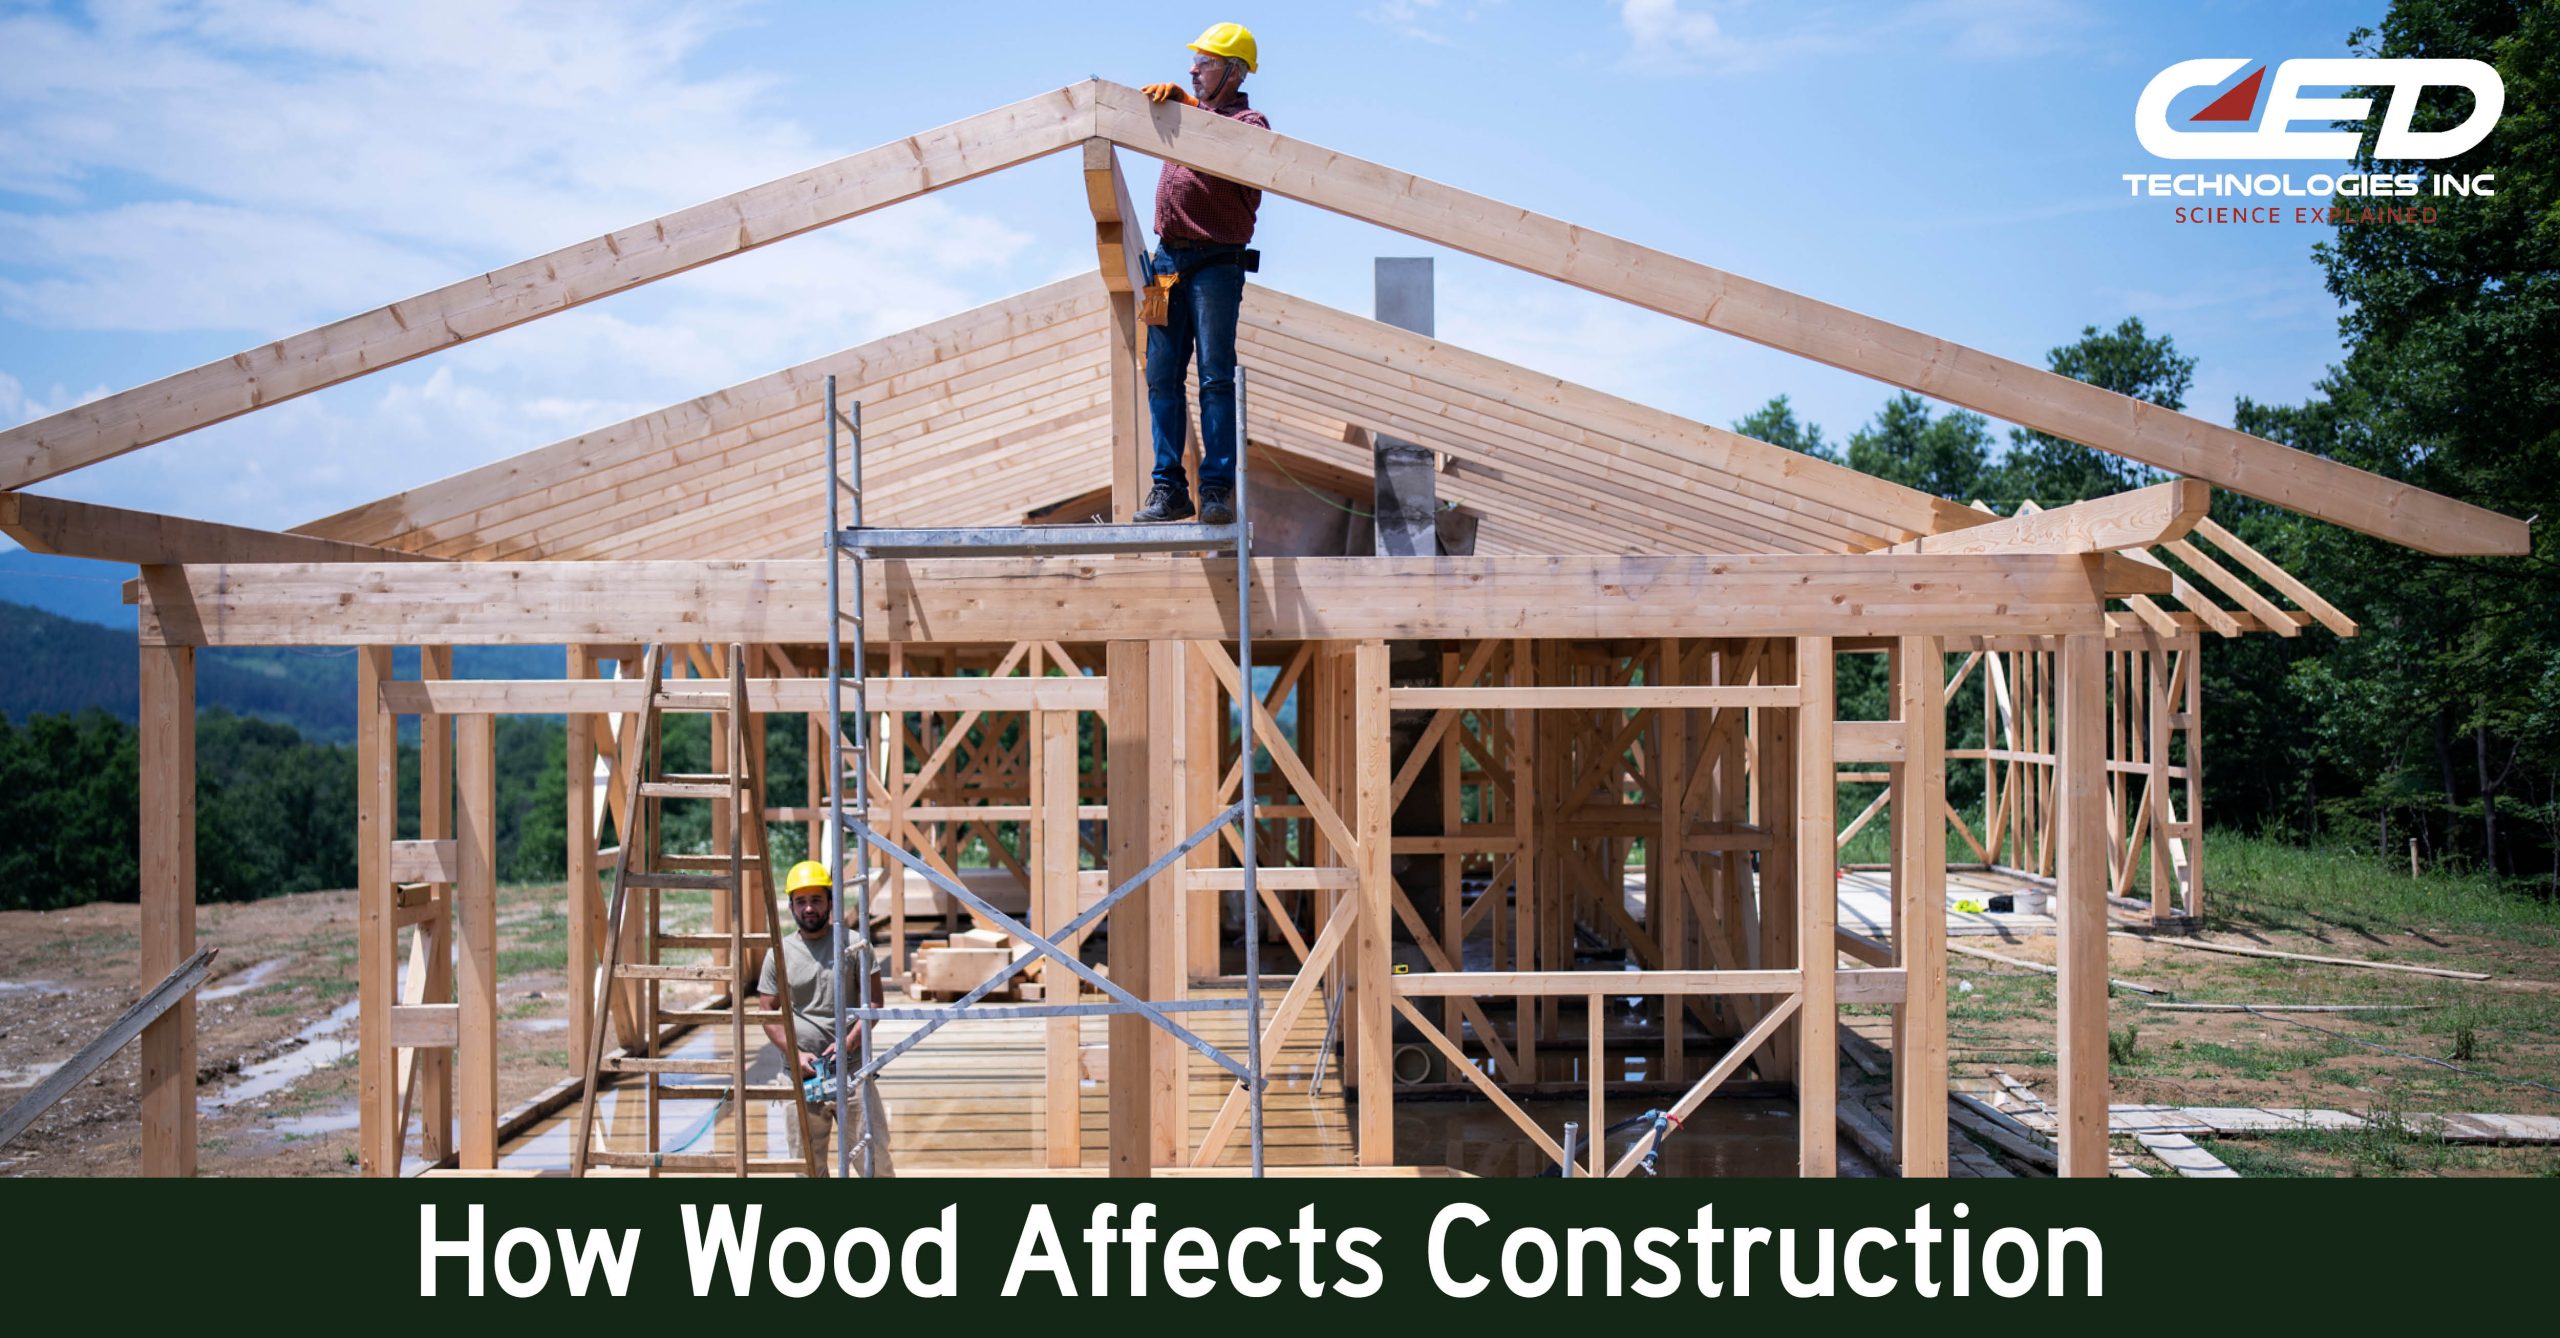 Is There More to Selecting the Correct Wood for Construction?